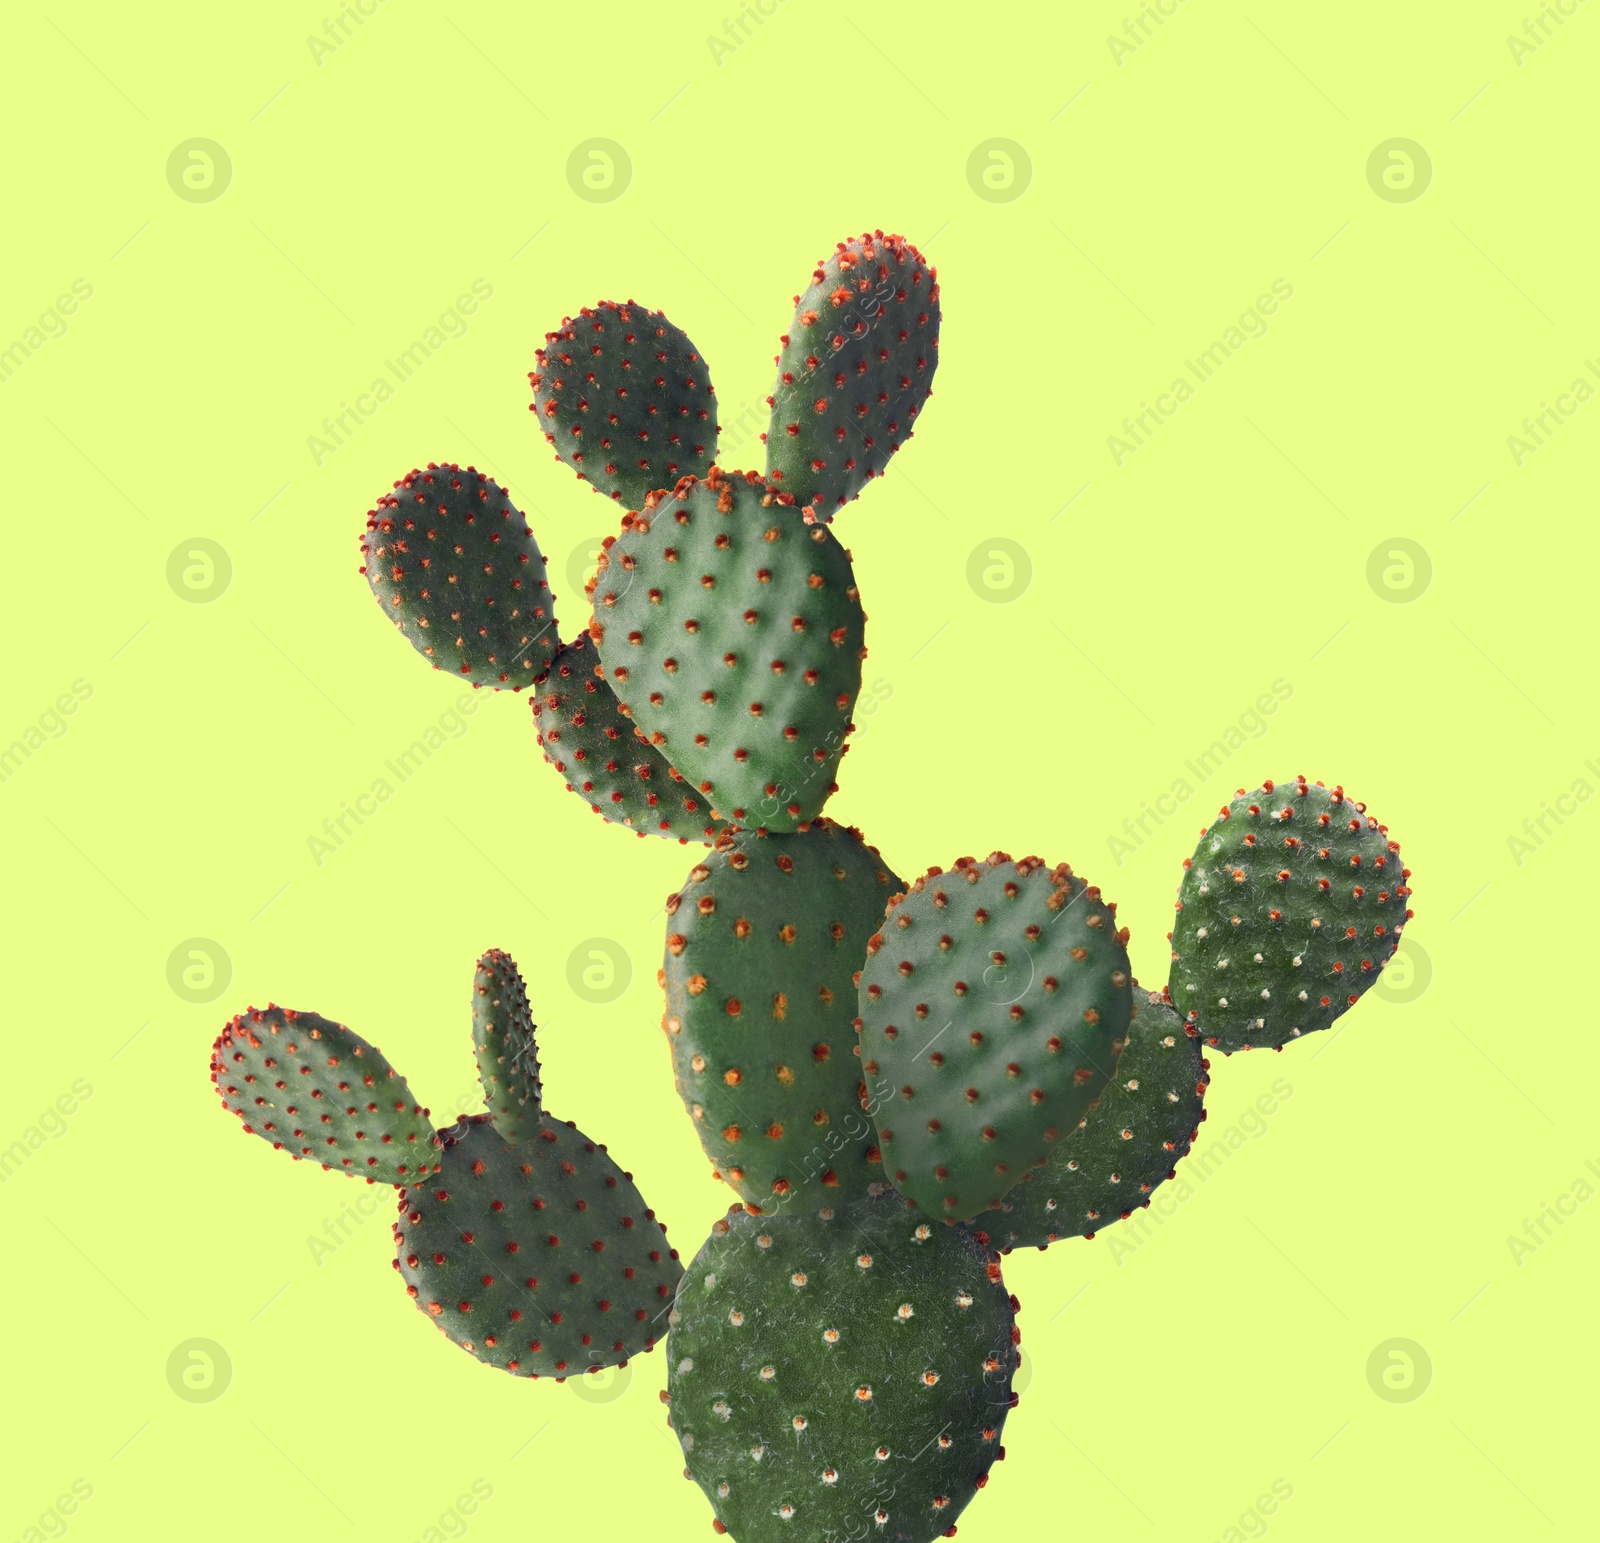 Image of Beautiful cactus plant on green yellow background